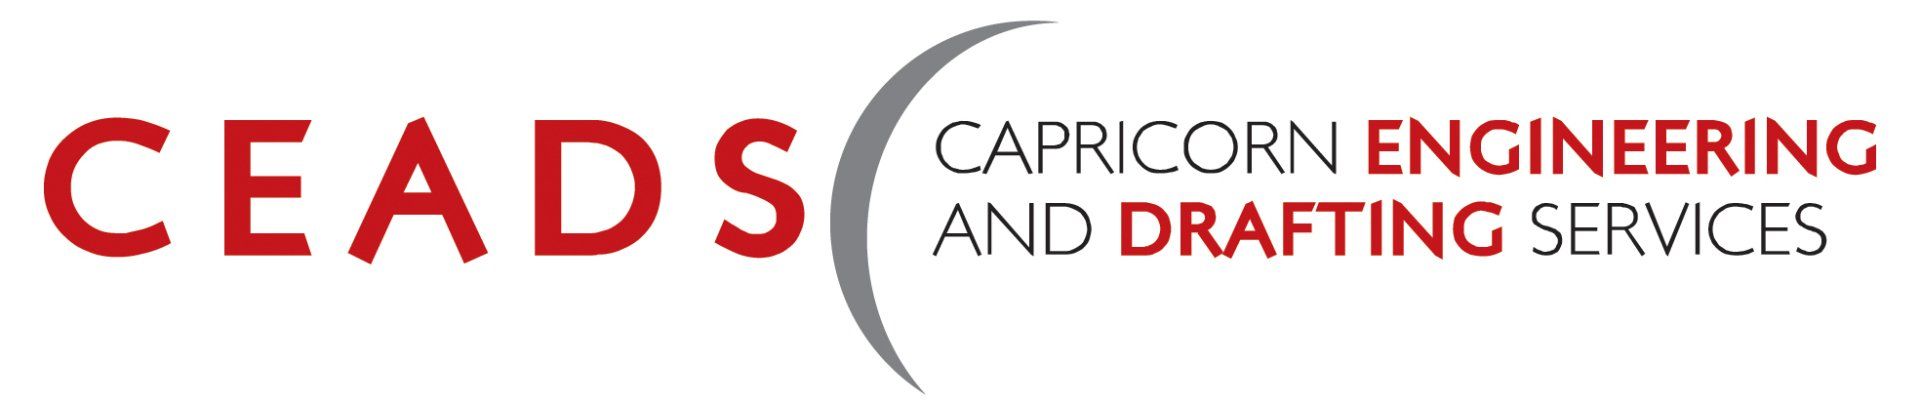 Welcome To Capricorn Engineering and Drafting Services!